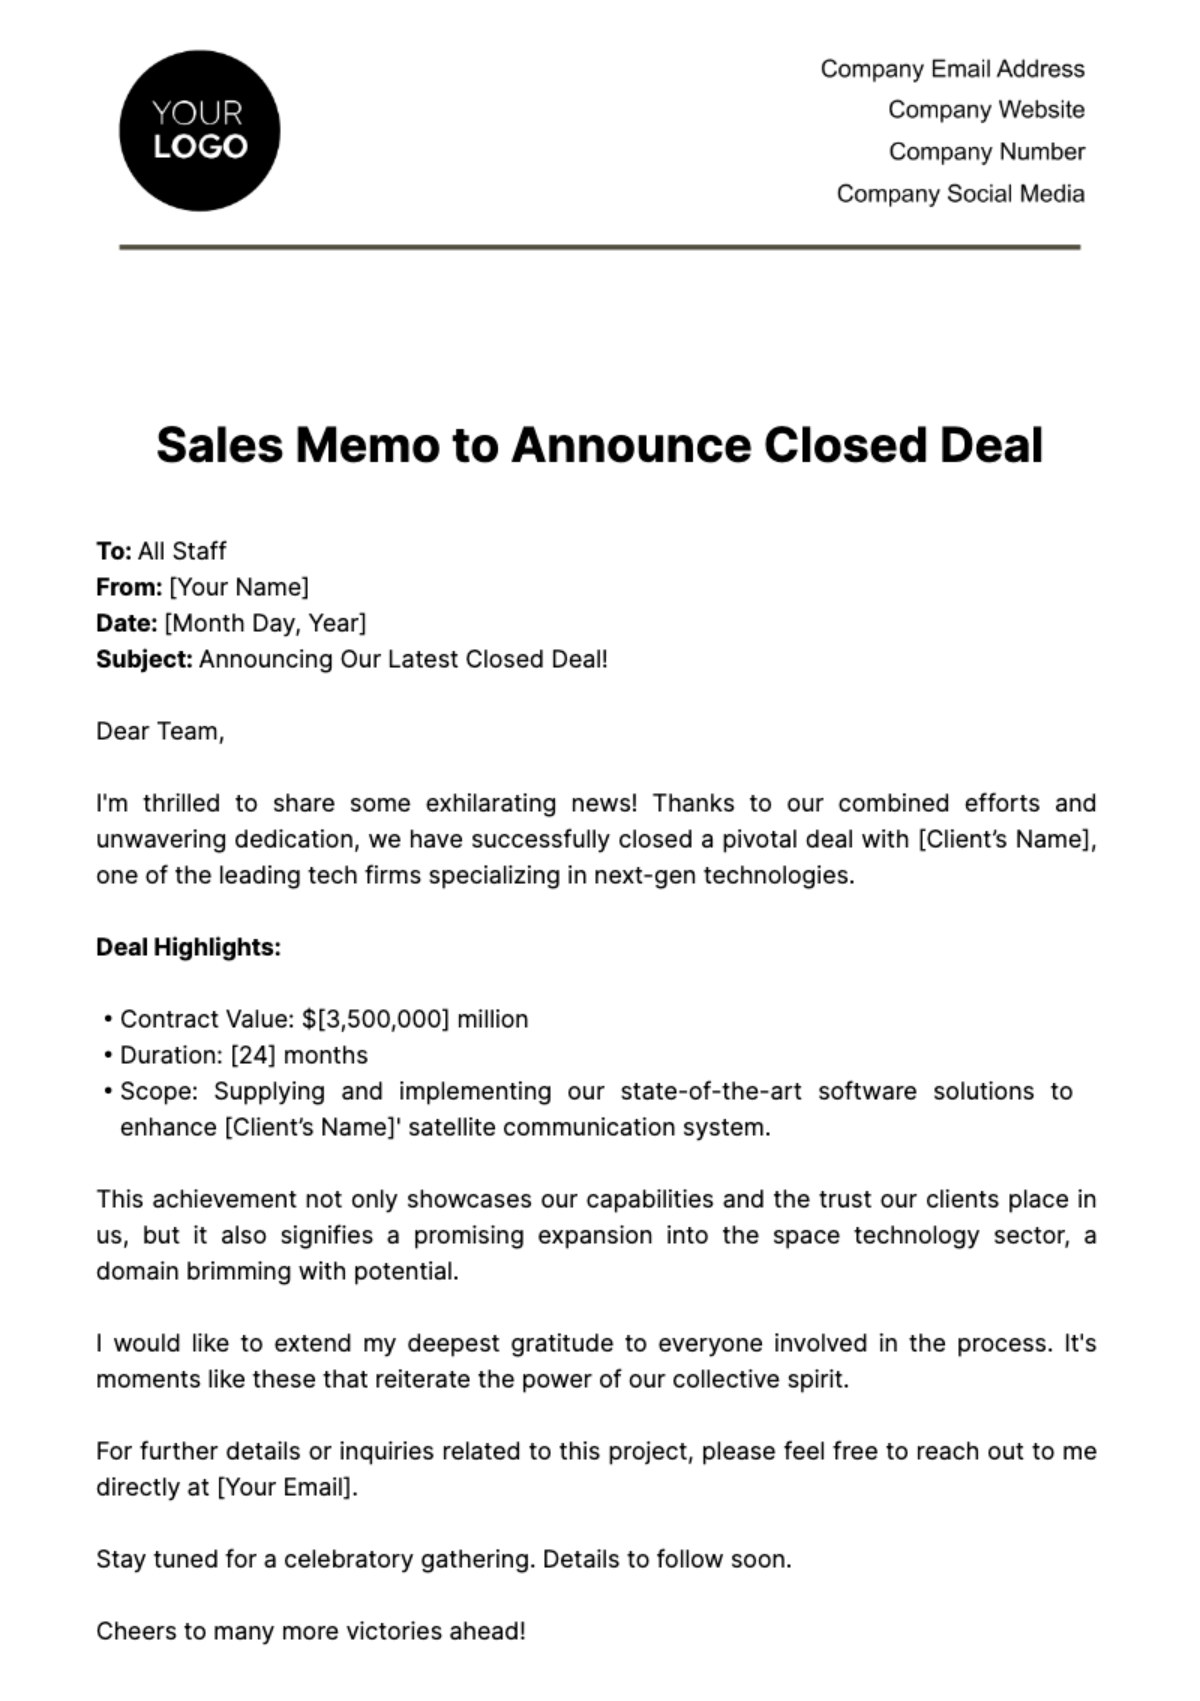 Sales Memo to Announce Closed Deal Template